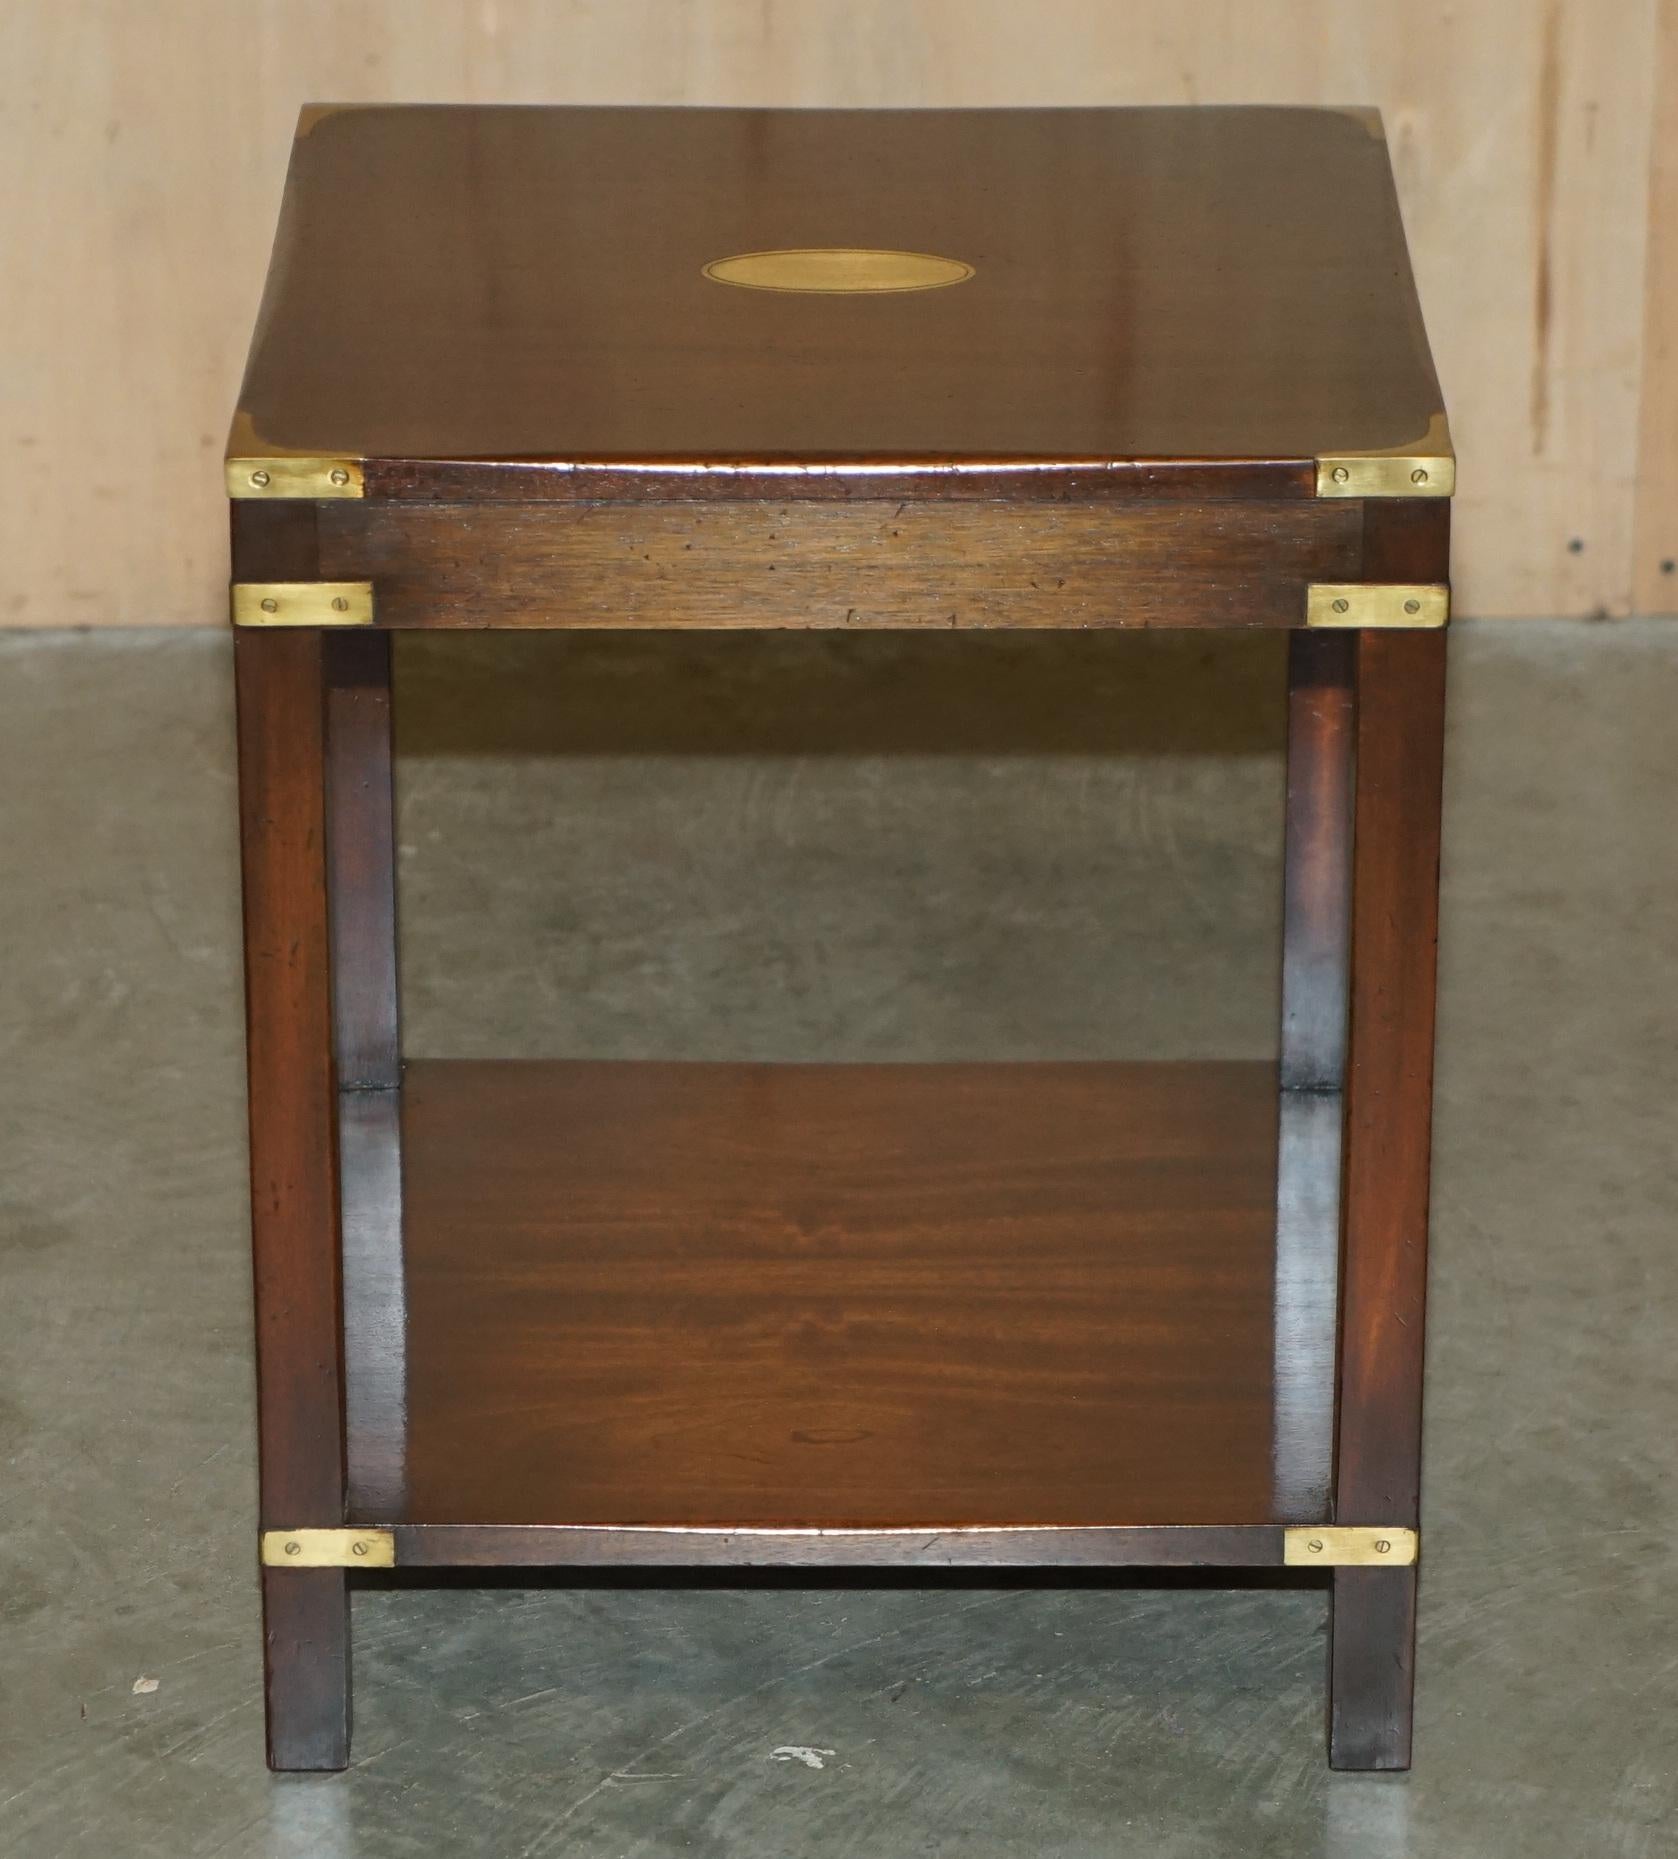 Campaign LUXURY HARRODS LONDON KENNEDY MILITARY CAMPAIGN HiGH SIDE END TABLE HARDWOOD For Sale